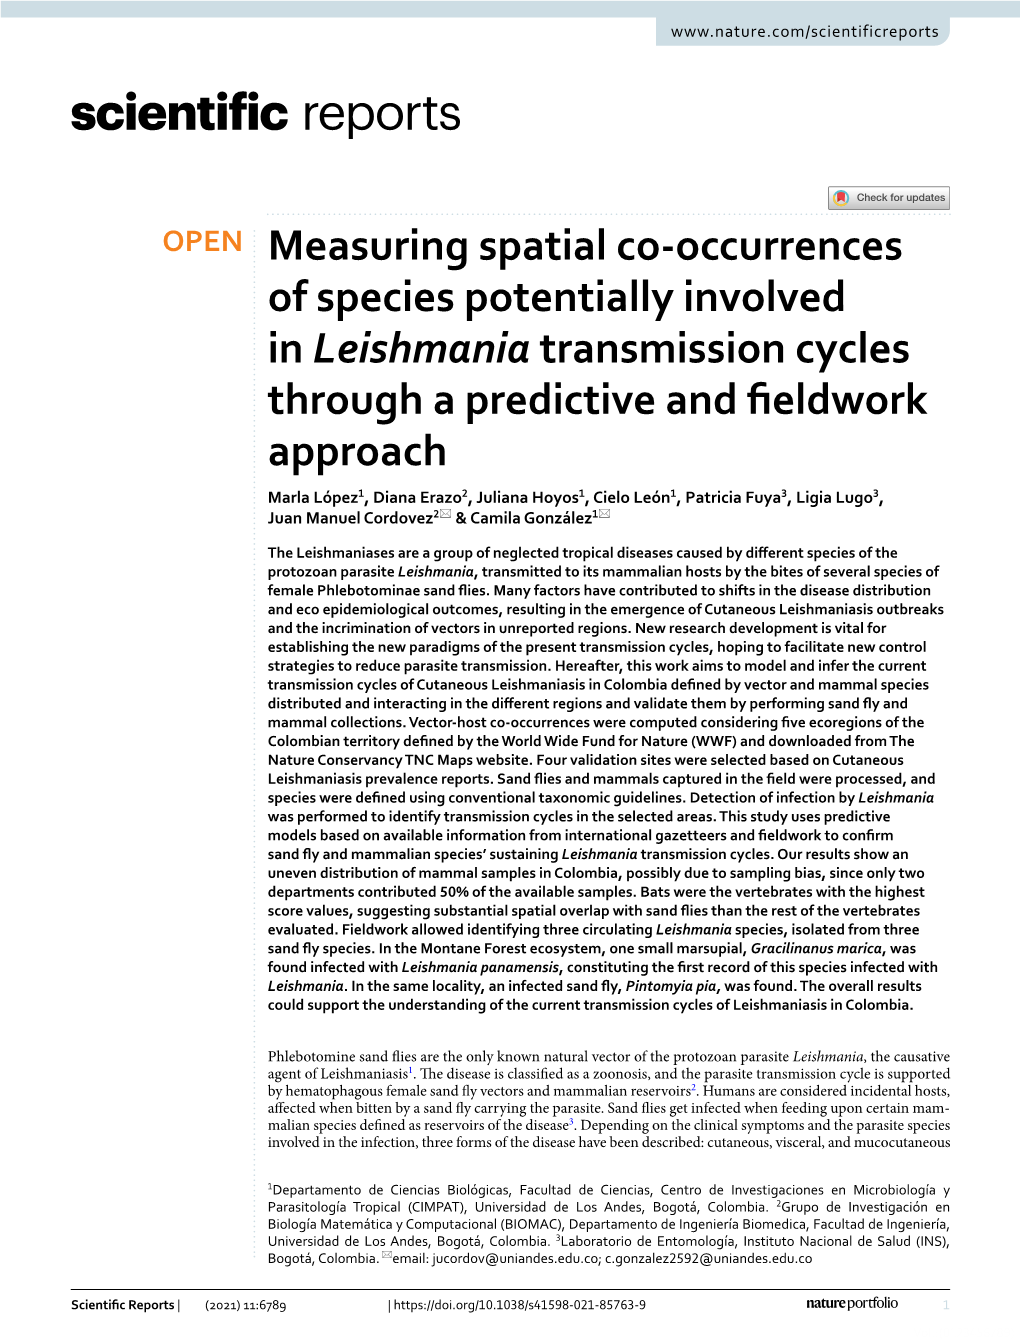 Measuring Spatial Co-Occurrences of Species Potentially Involved in Leishmania Transmission Cycles Through a Predictive and Fiel